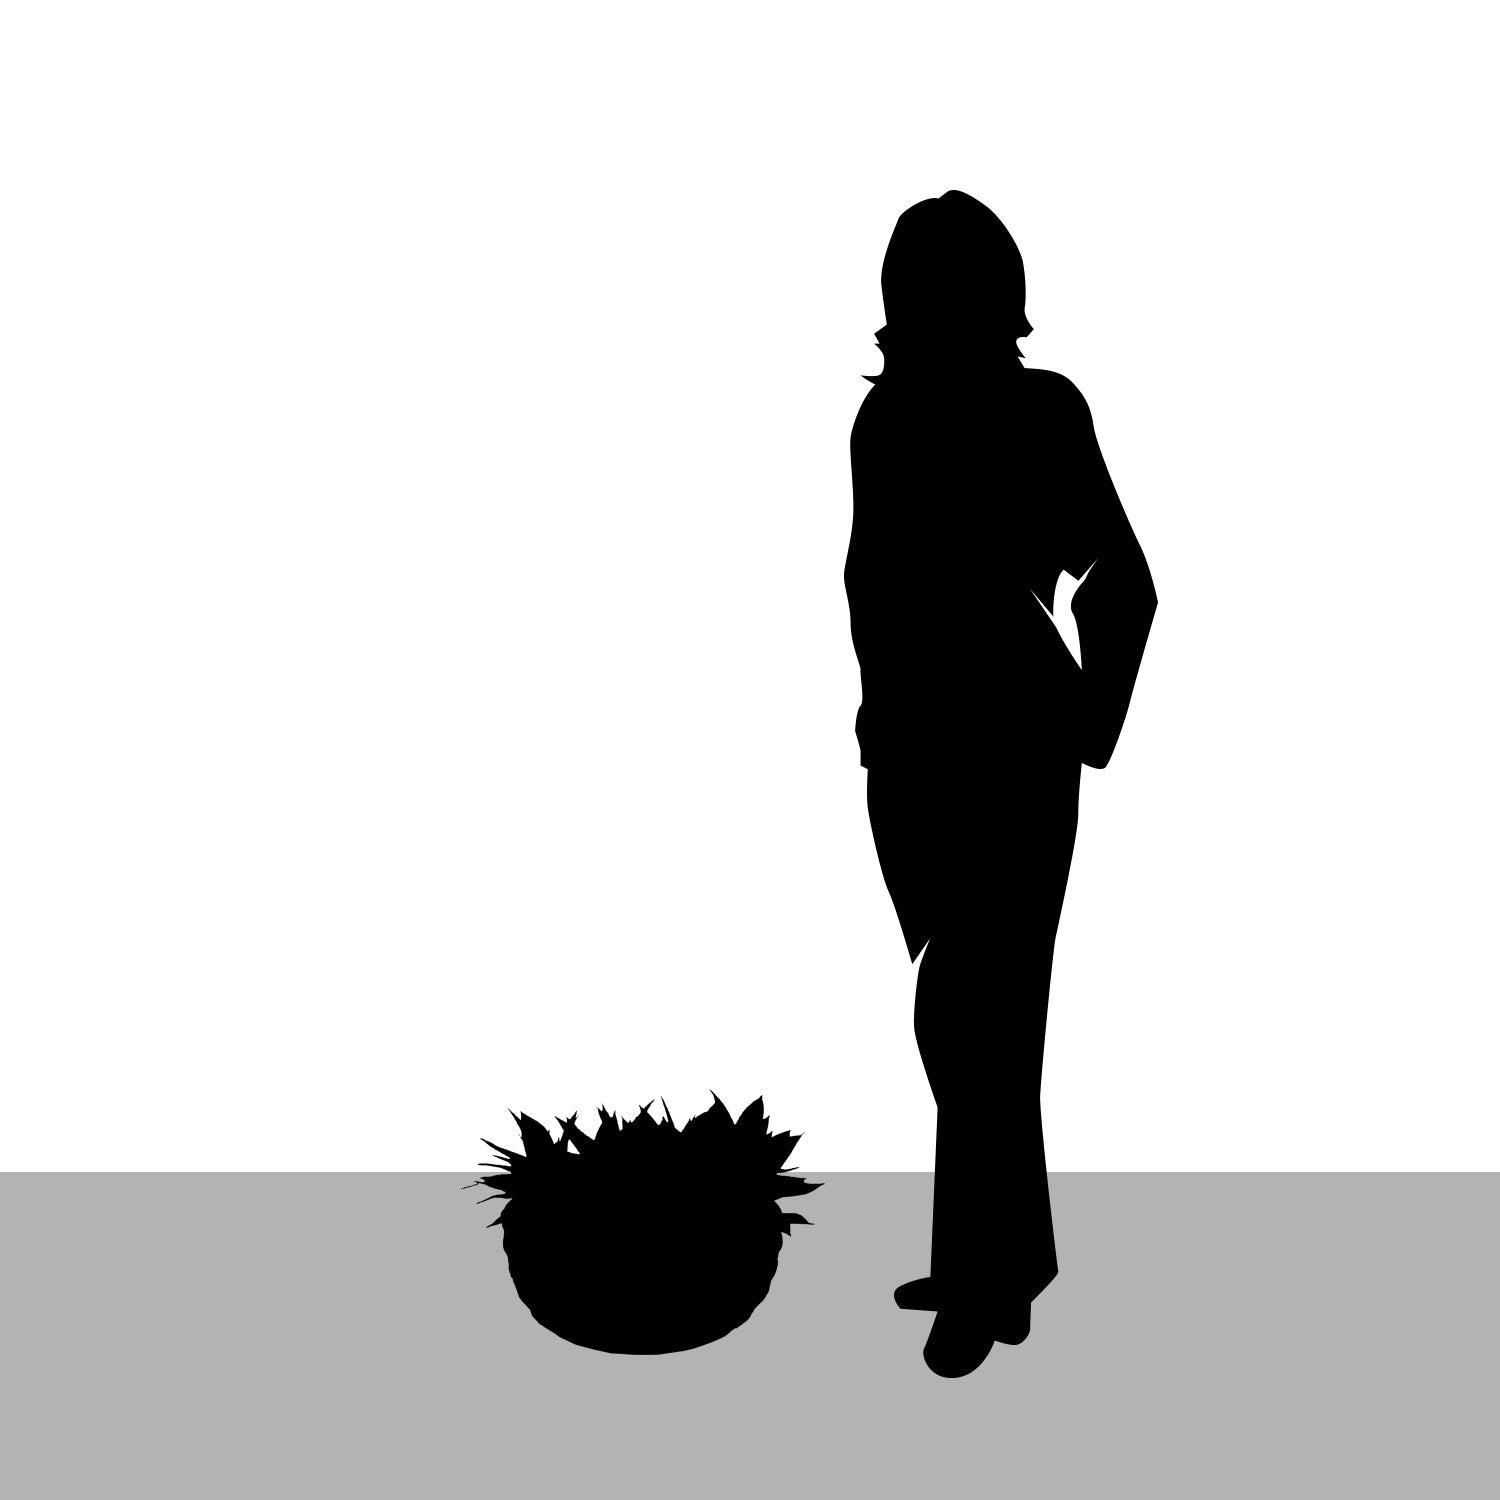 Diagram showing size of Sansevieria permanent botanical design Dolma Bowl in comparison to a US-average sized woman.